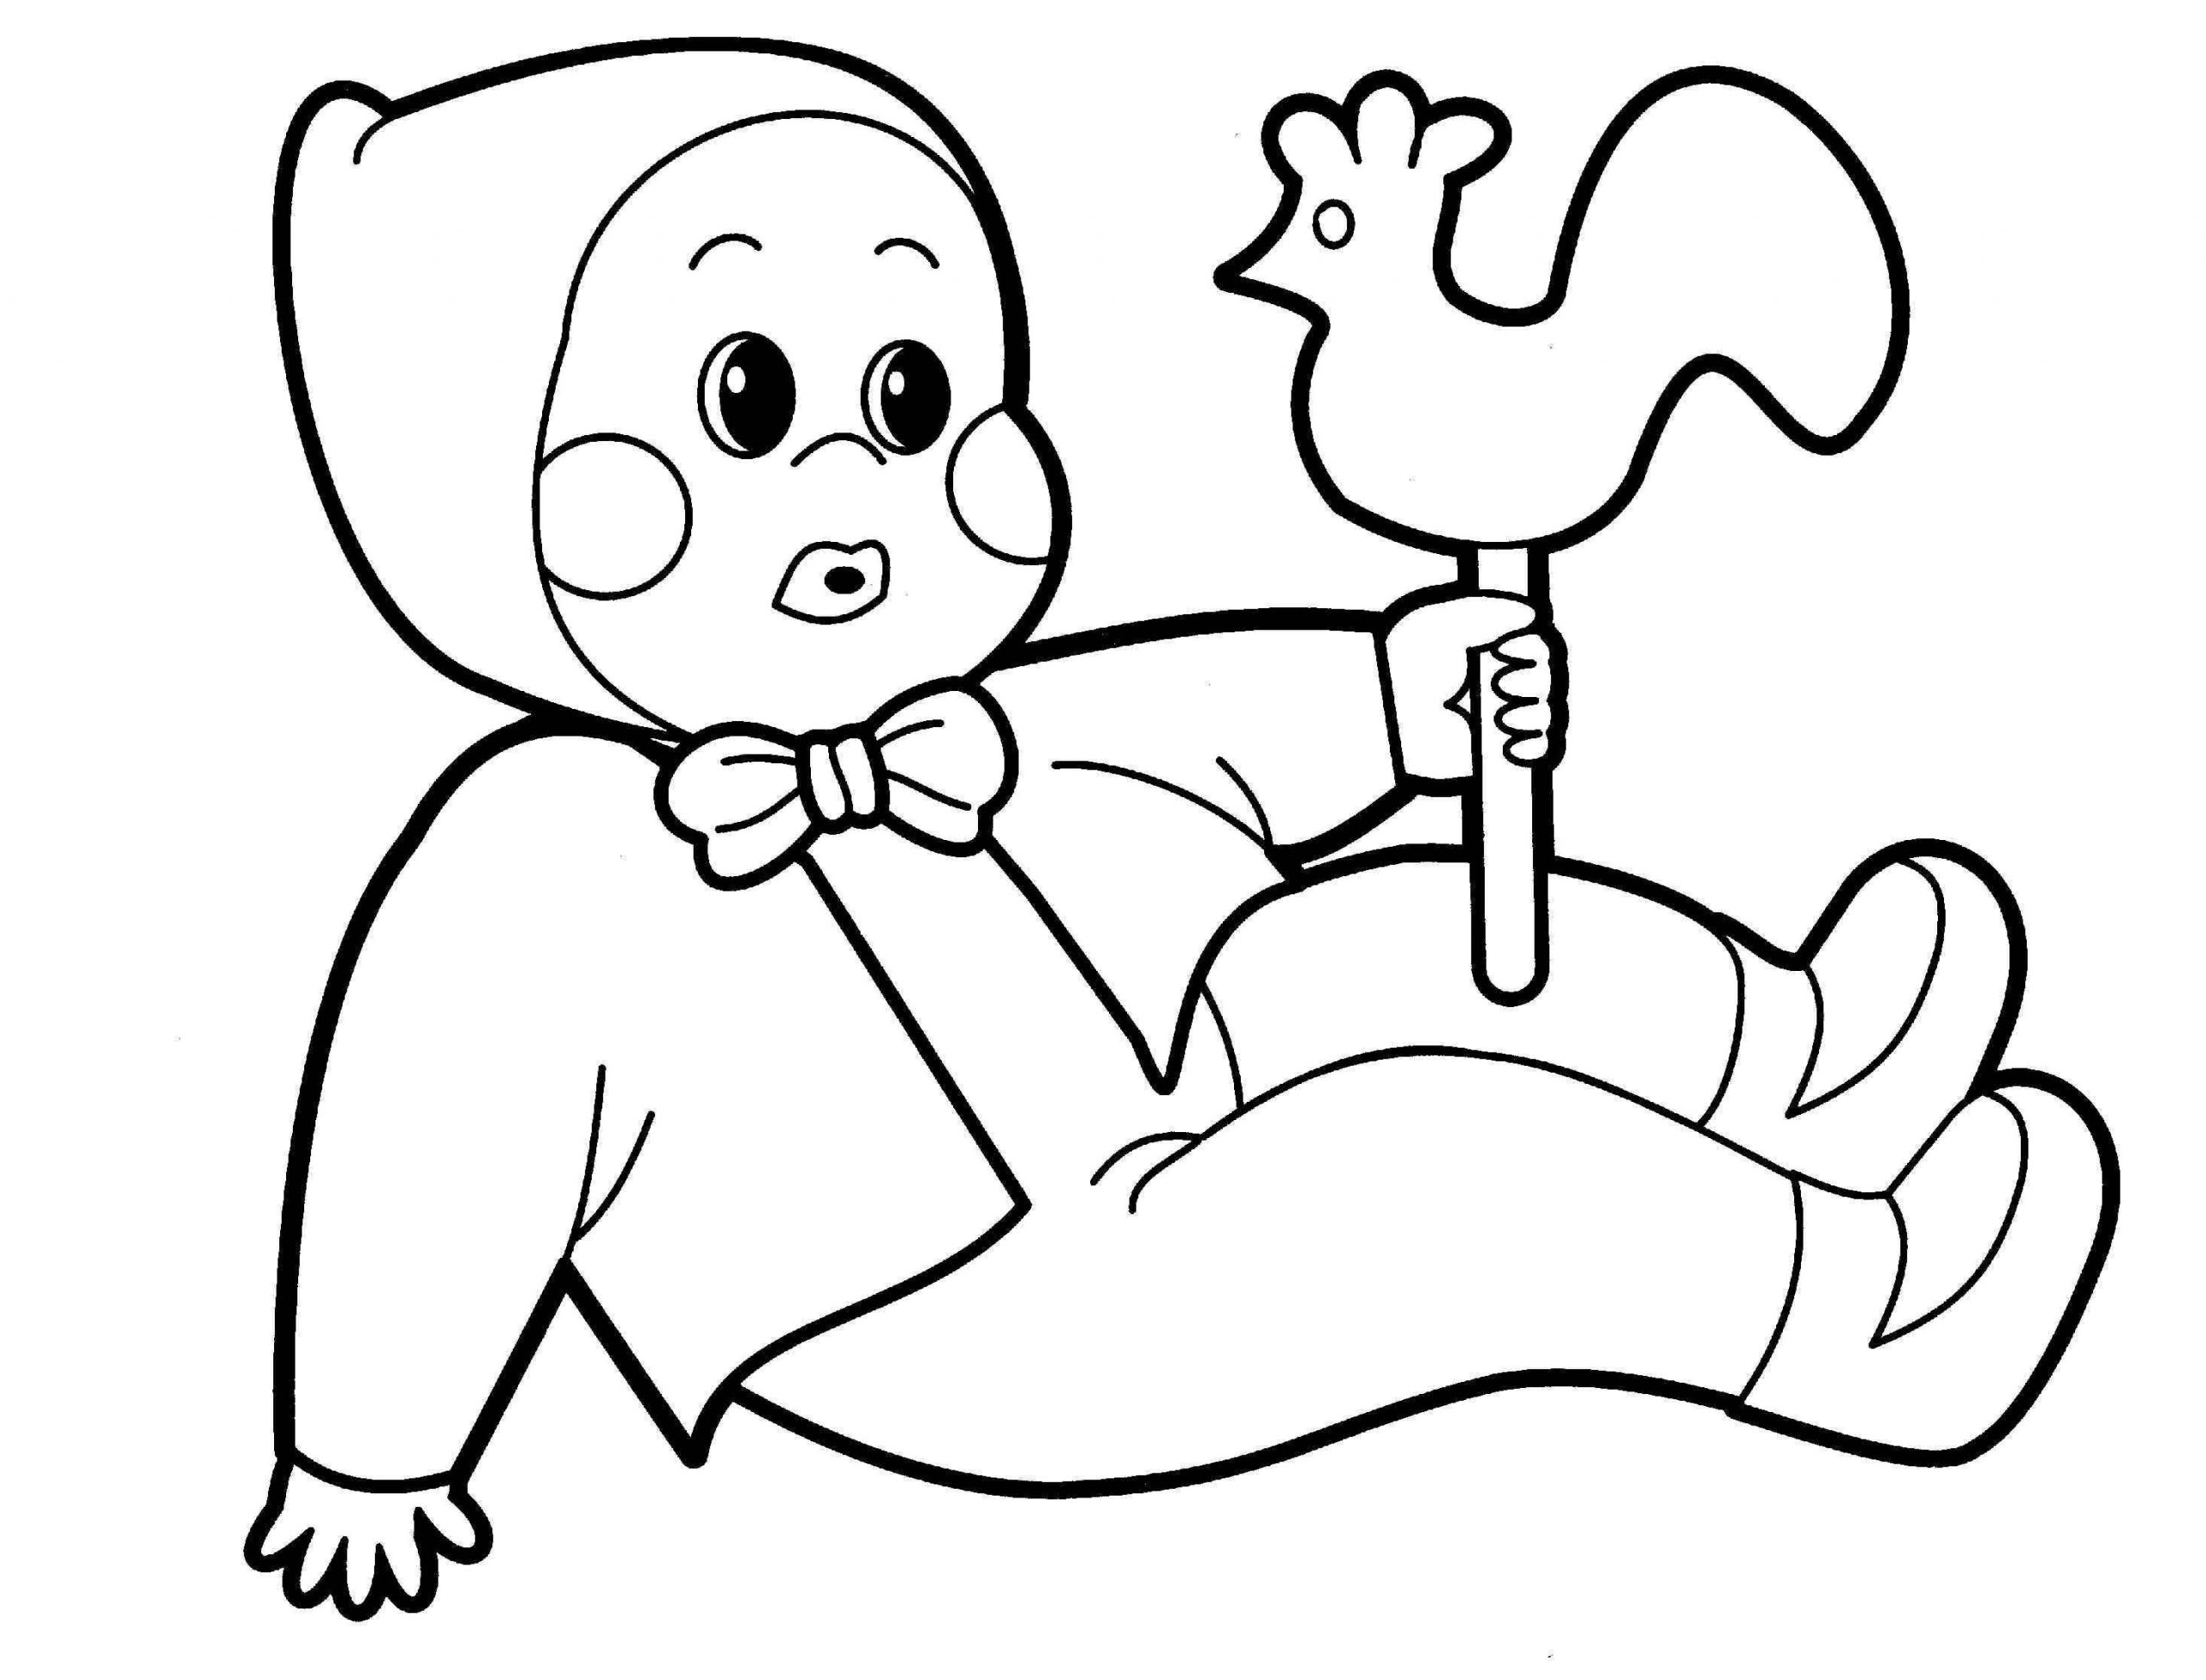 Baby Doll Coloring Page
 Baby Doll Coloring Pages Home Sketch Coloring Page